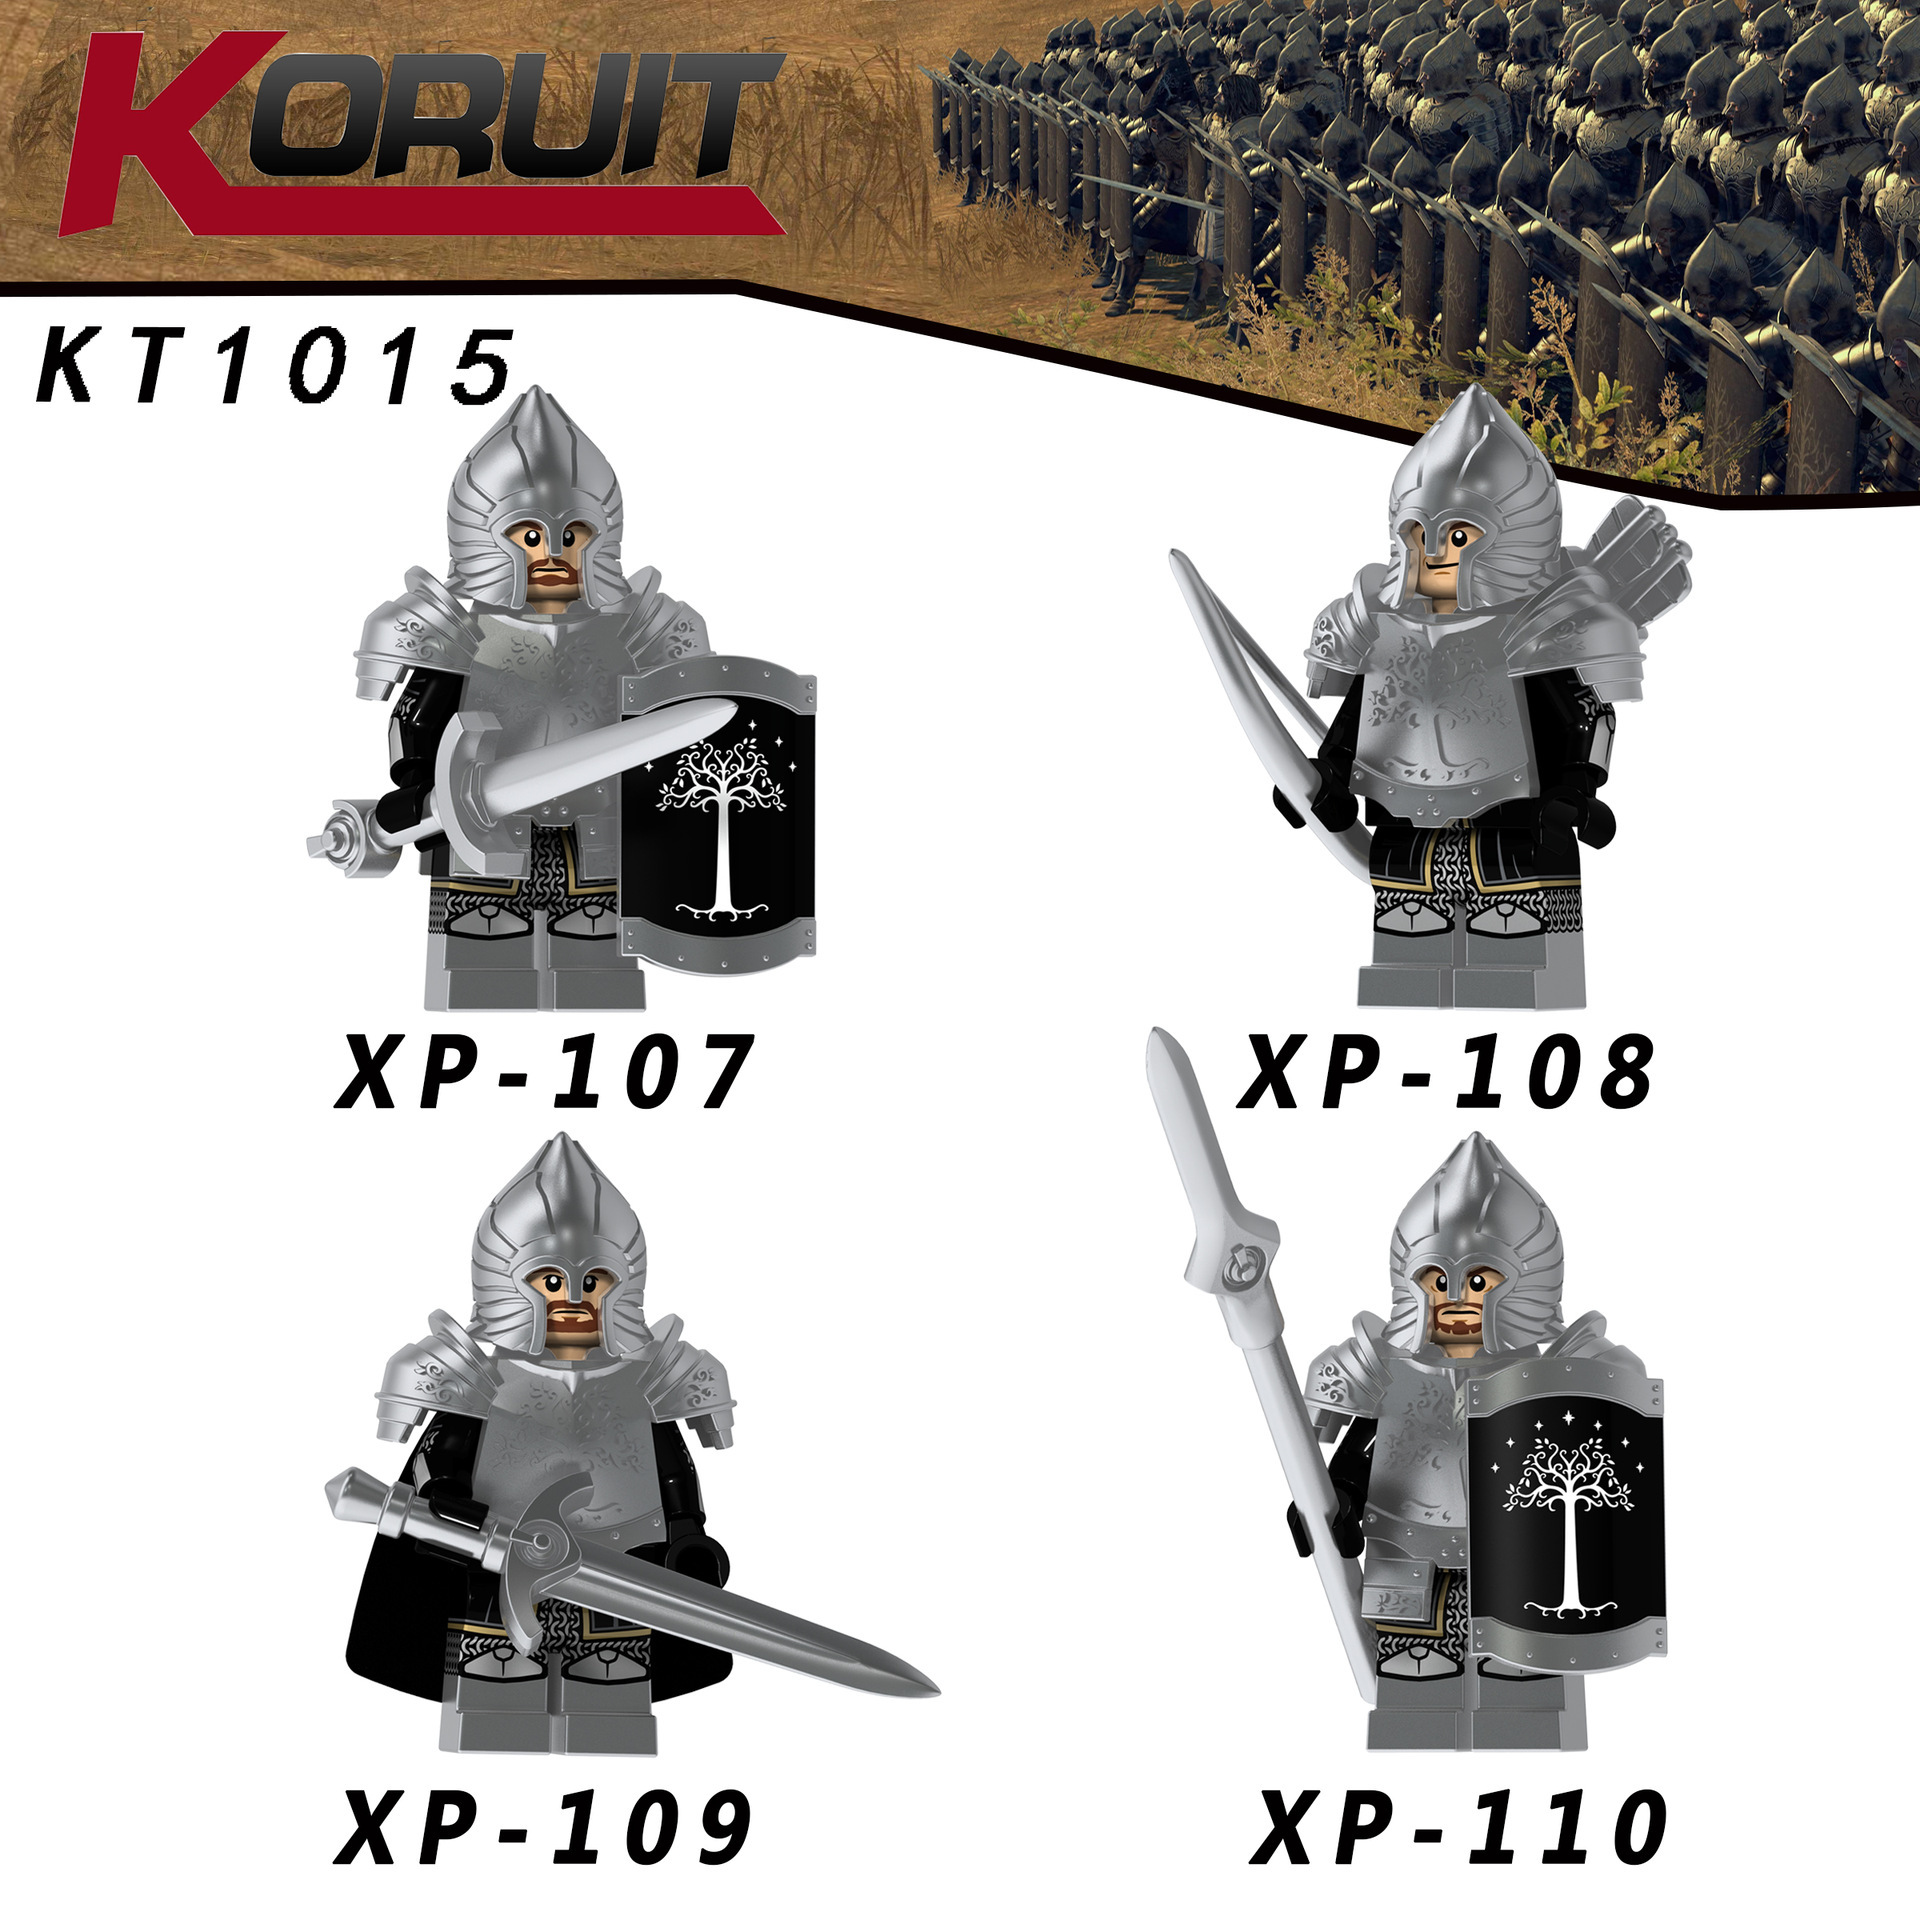 Lord Rings Gondor Roman Soldiers Lancer Medieval Knight Building Block Kids Toys